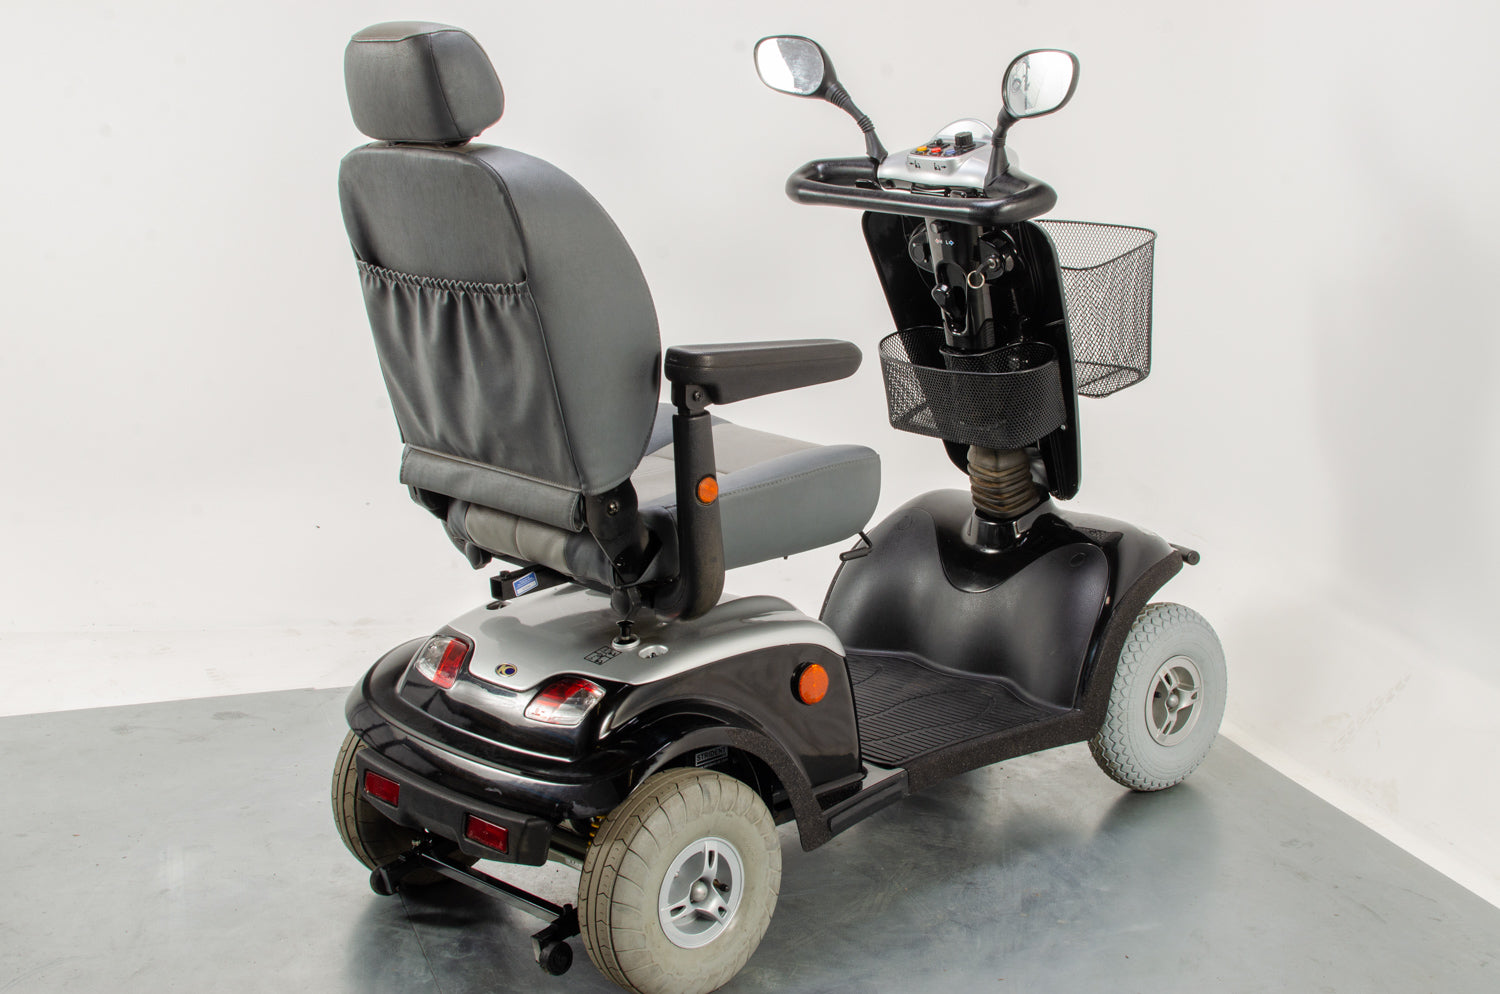 Kymco Maxi XLS Used Mobility Scooter 8mph Large All-Terrain Suspension